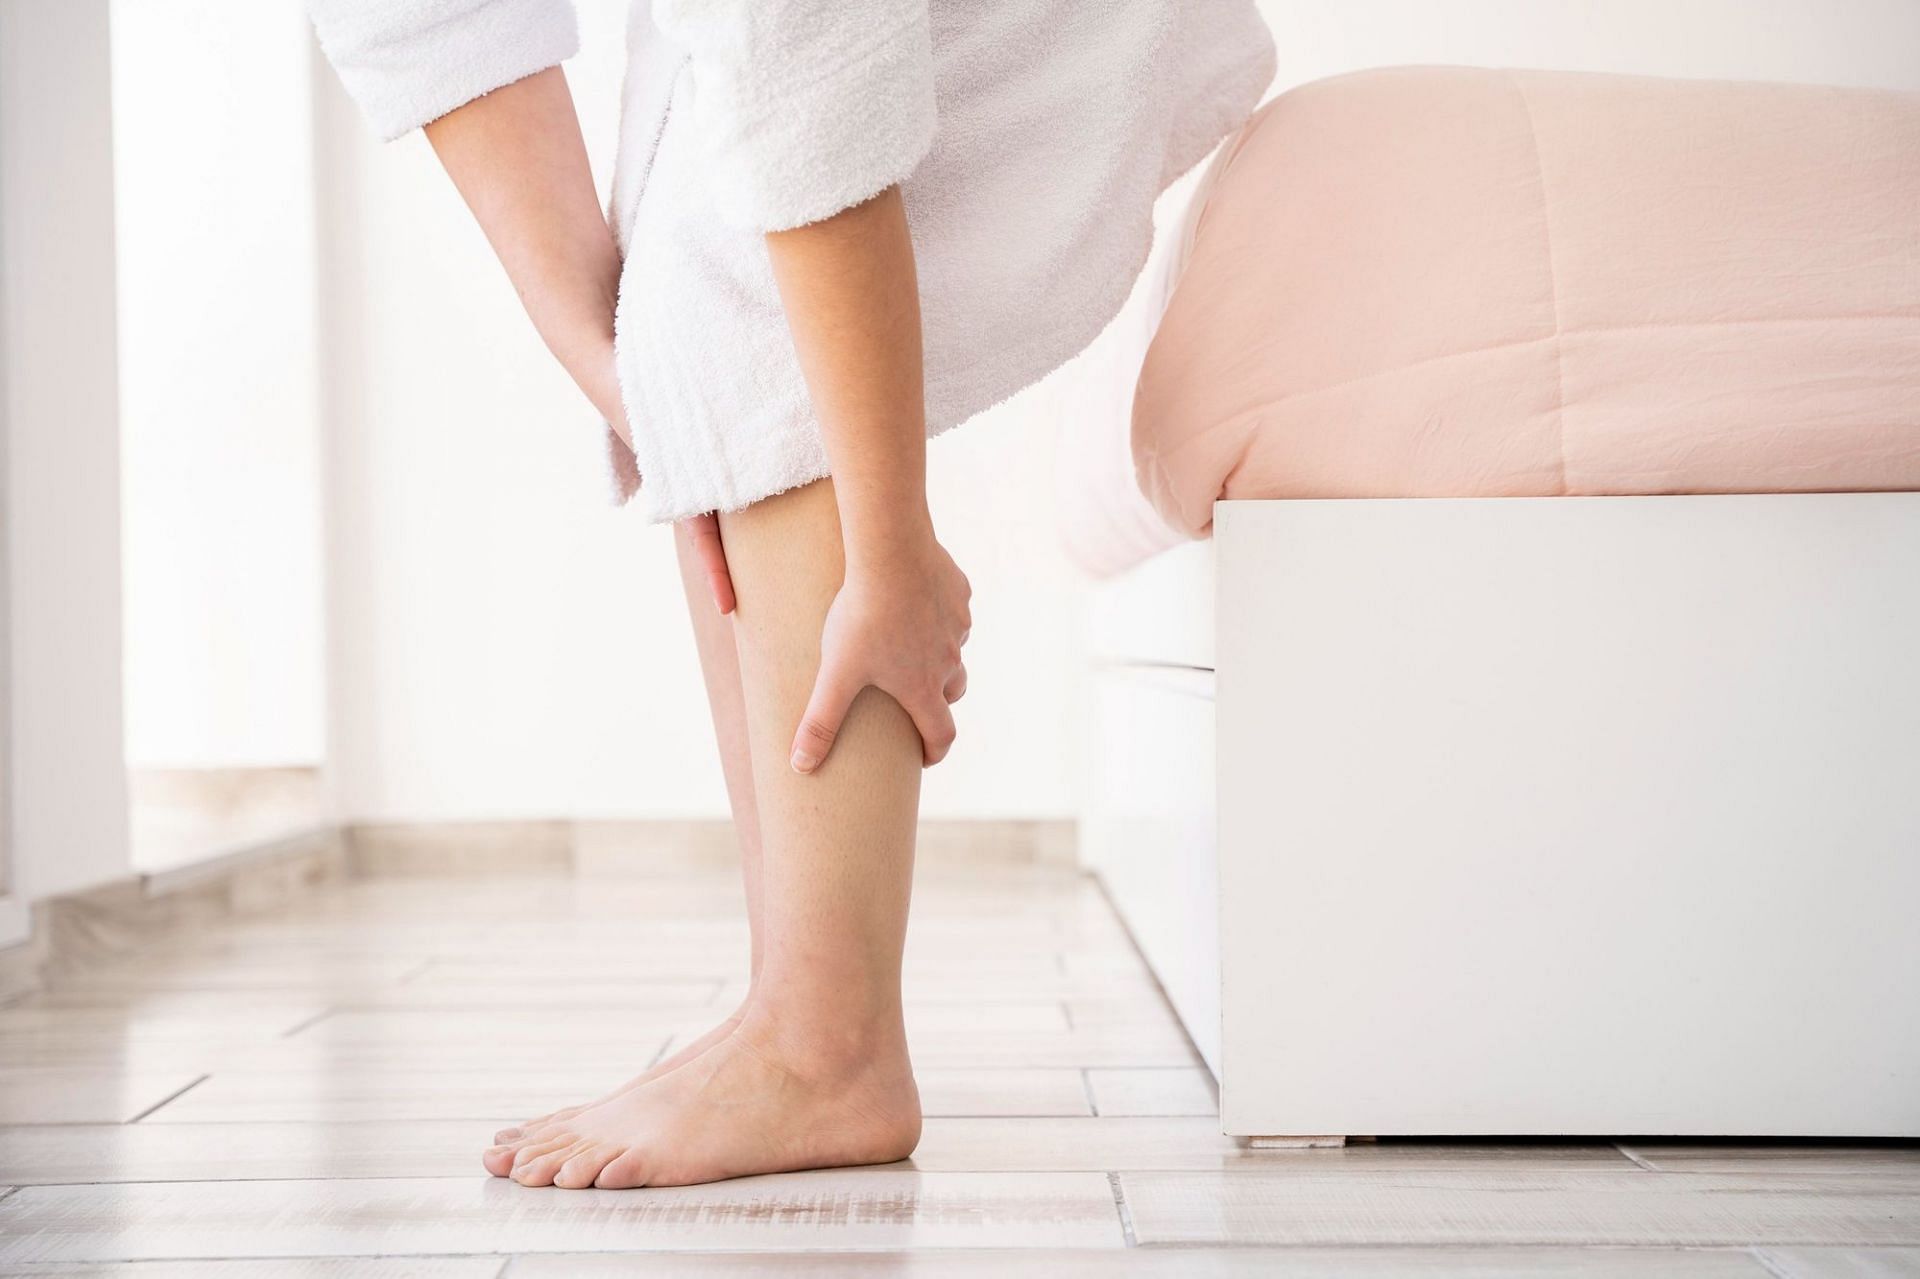 Fungal infection can cause itchy ankles, especially at night. (Image via Freepik)